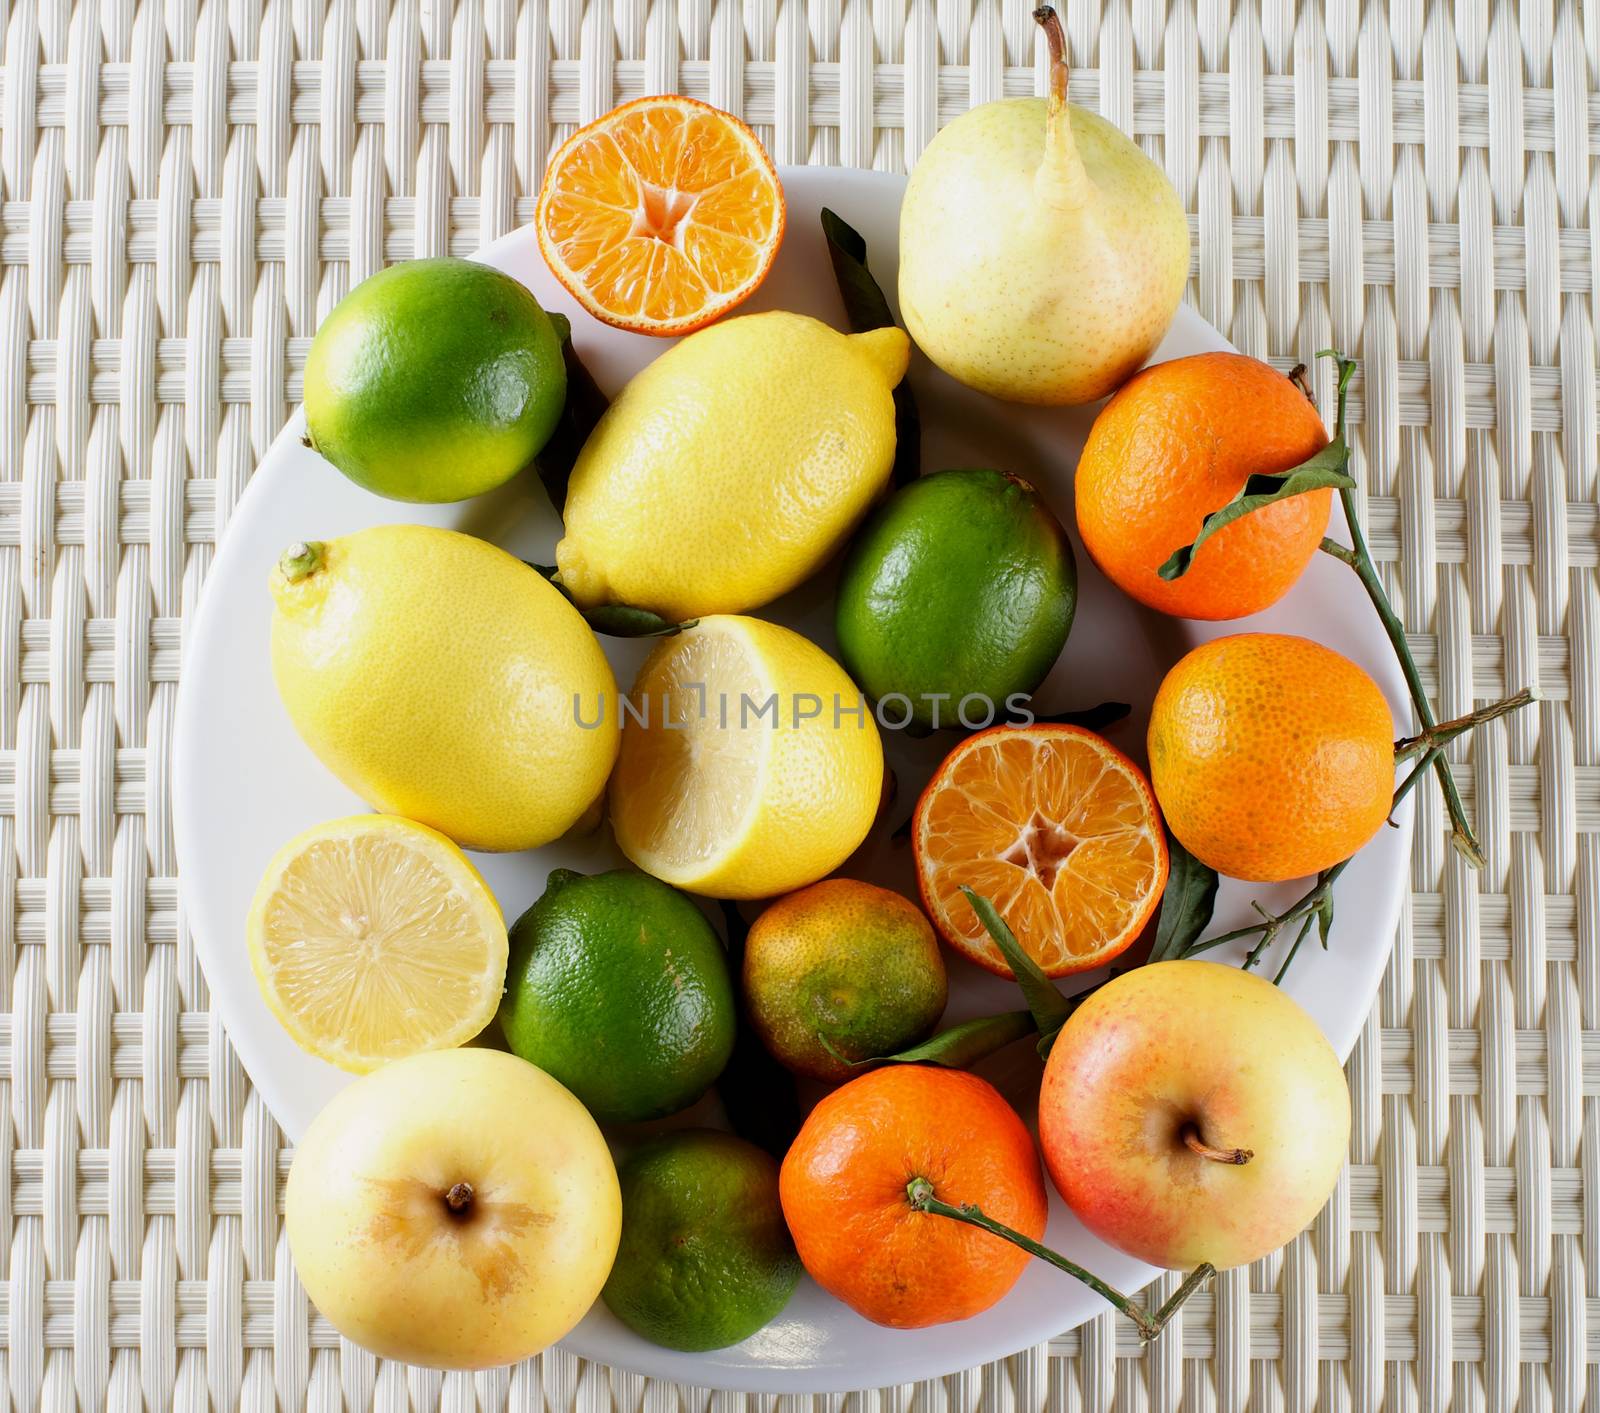 Big Plate with Fresh Ripe Lemons, Limes, Oranges, Tangerines, Yellow Apples and White Pears on Wicker background. Top View